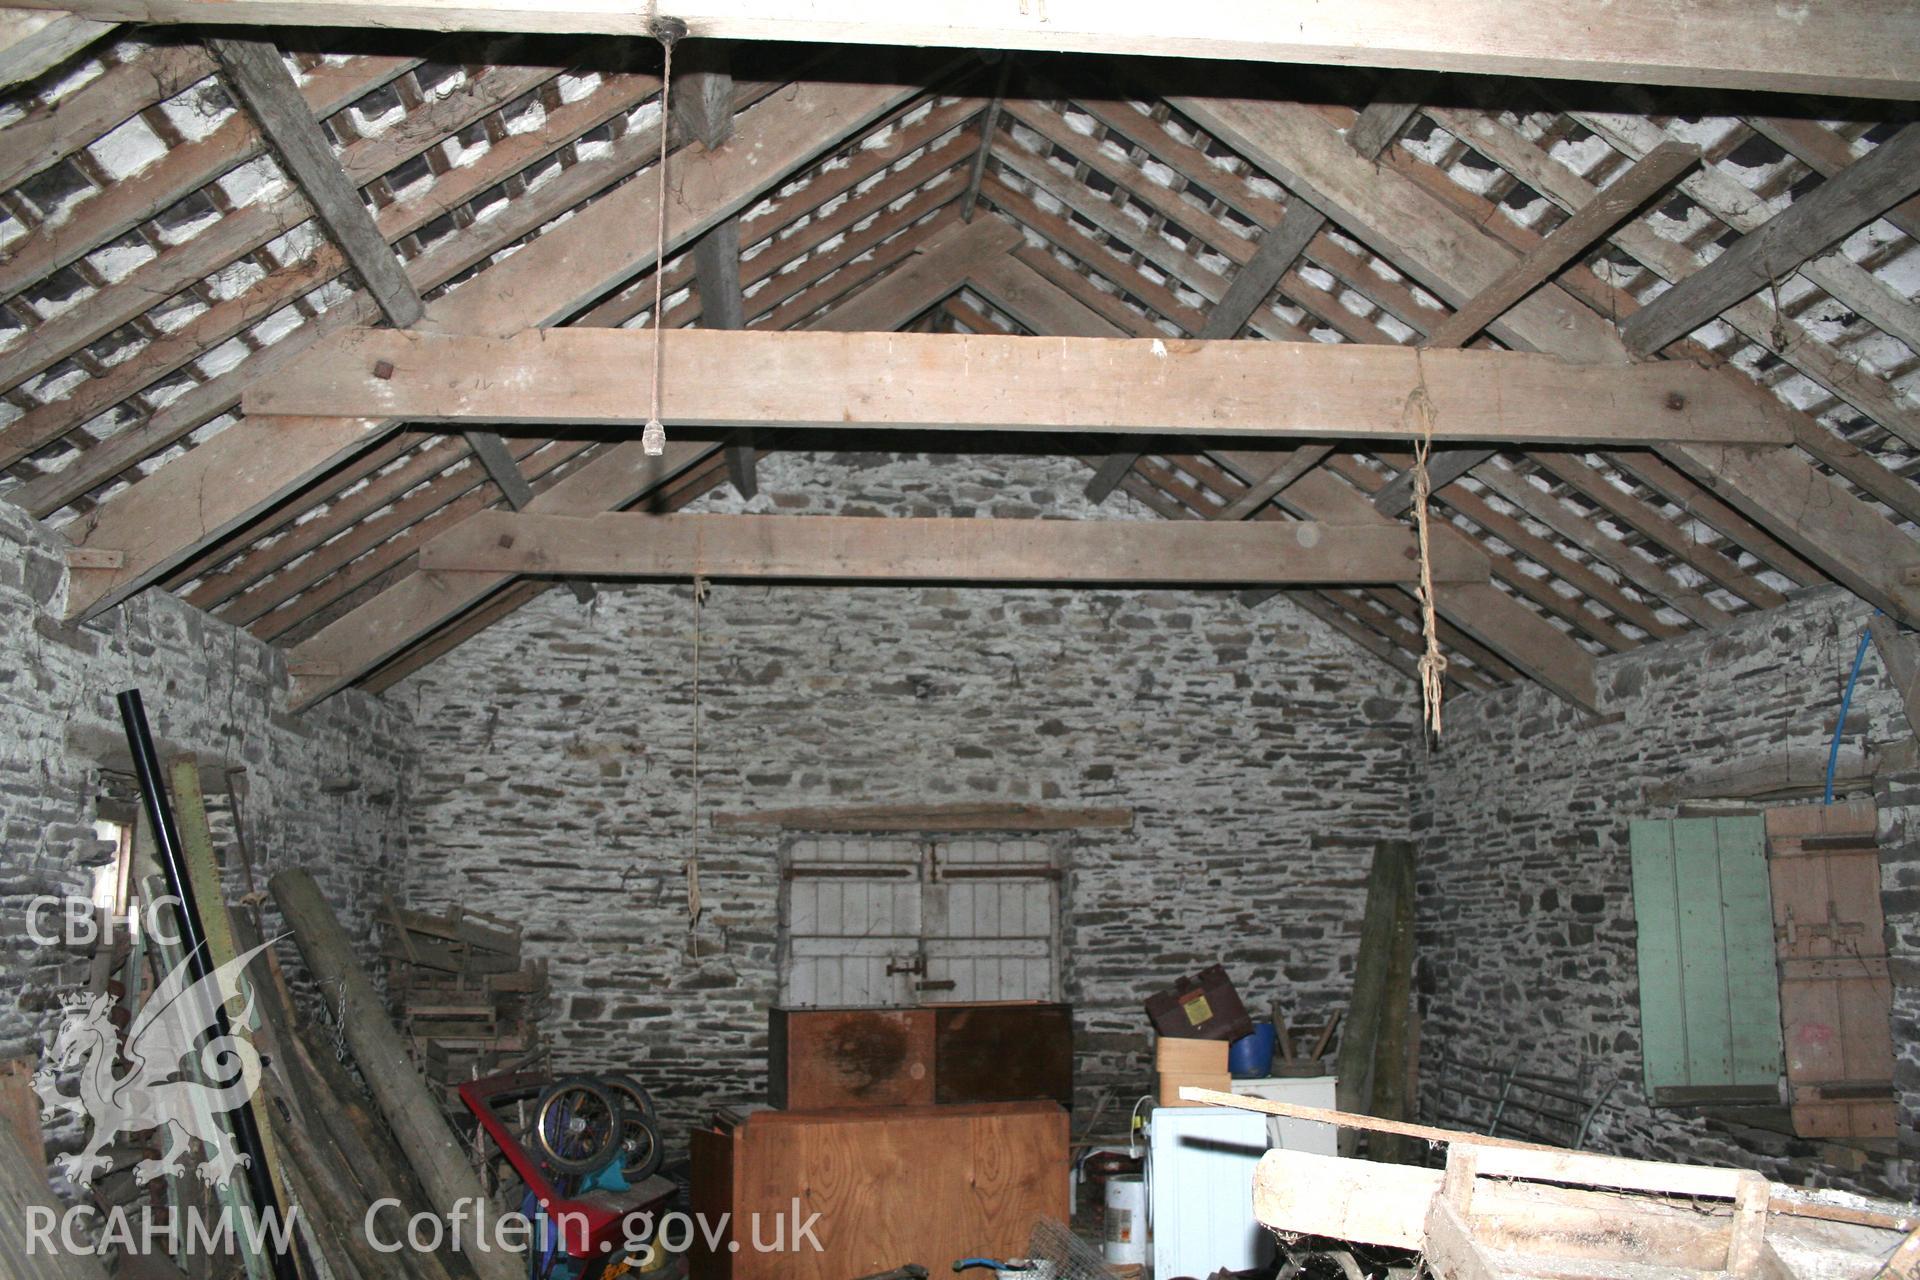 Interior view of first floor of the complex showing wooden beams. Photographic survey of the threshing house, straw house, mixing house and root house at Tan-y-Graig Farm, Llanfarian, conducted by Geoff Ward and John Wiles, 11th December 2006.